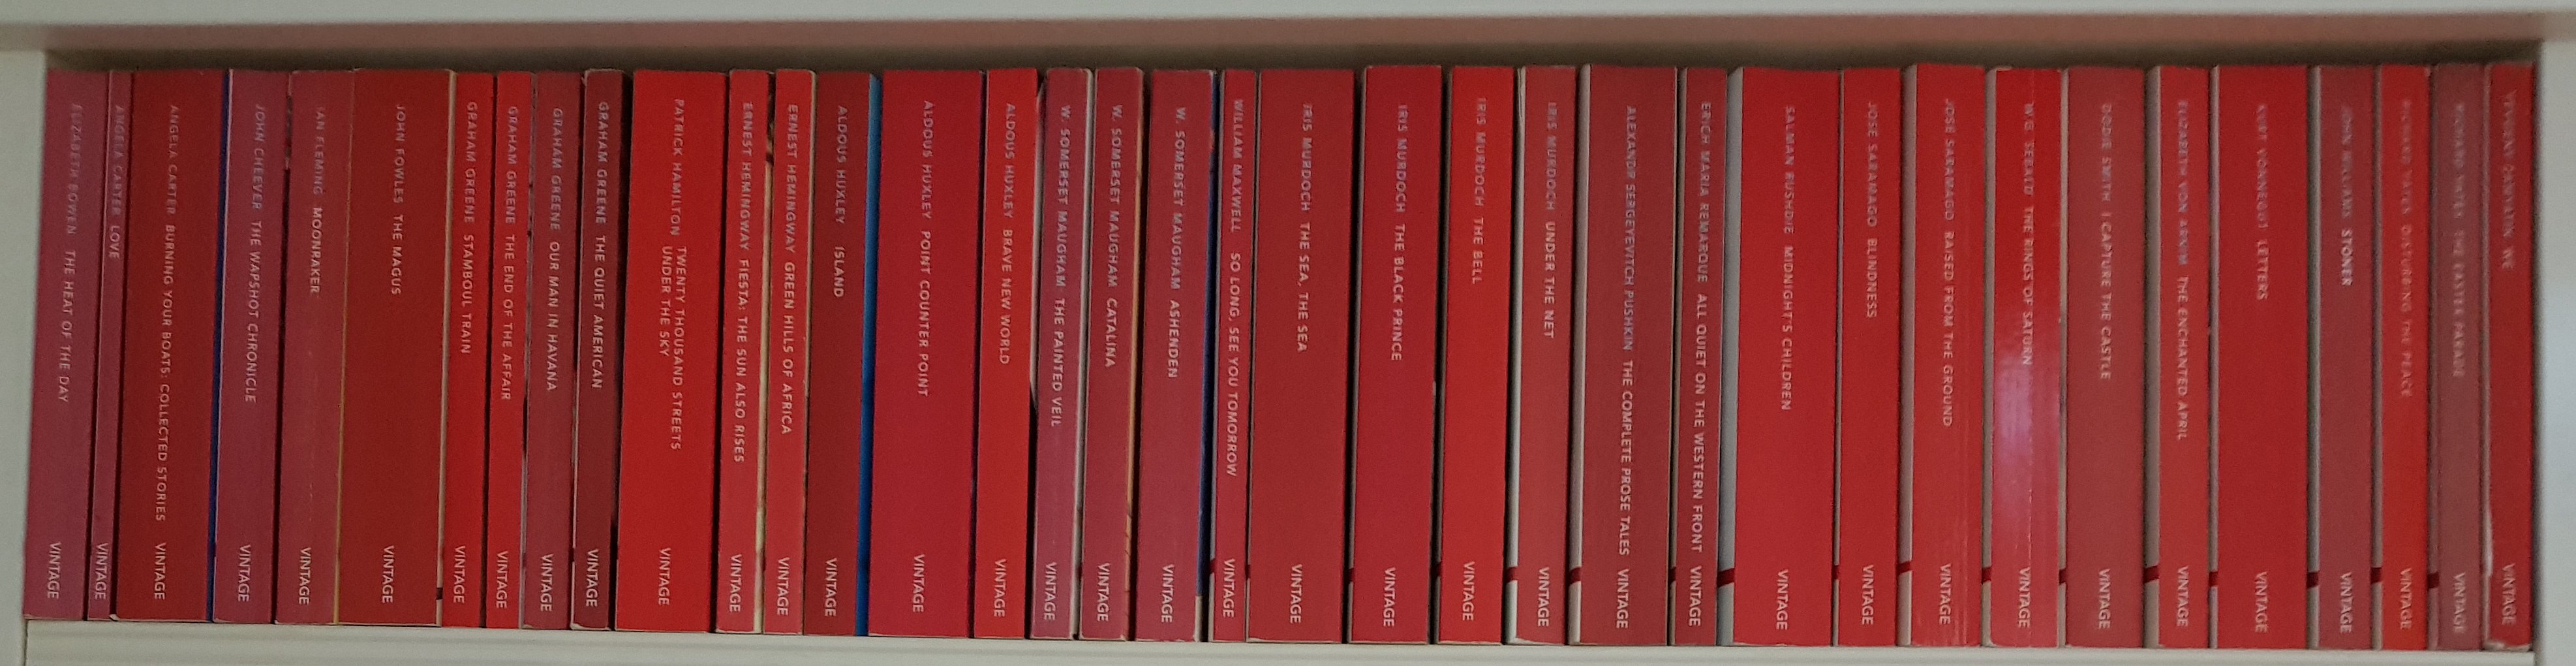 Nuværende Assassin Jernbanestation Vintage Books on Twitter: "Lovely red spines from @samaroffical on  instagram. Does anyone else have a red spine collection lined up  beautifully like this? #VintageInTheWild https://t.co/HhFXeGtiNN" / Twitter